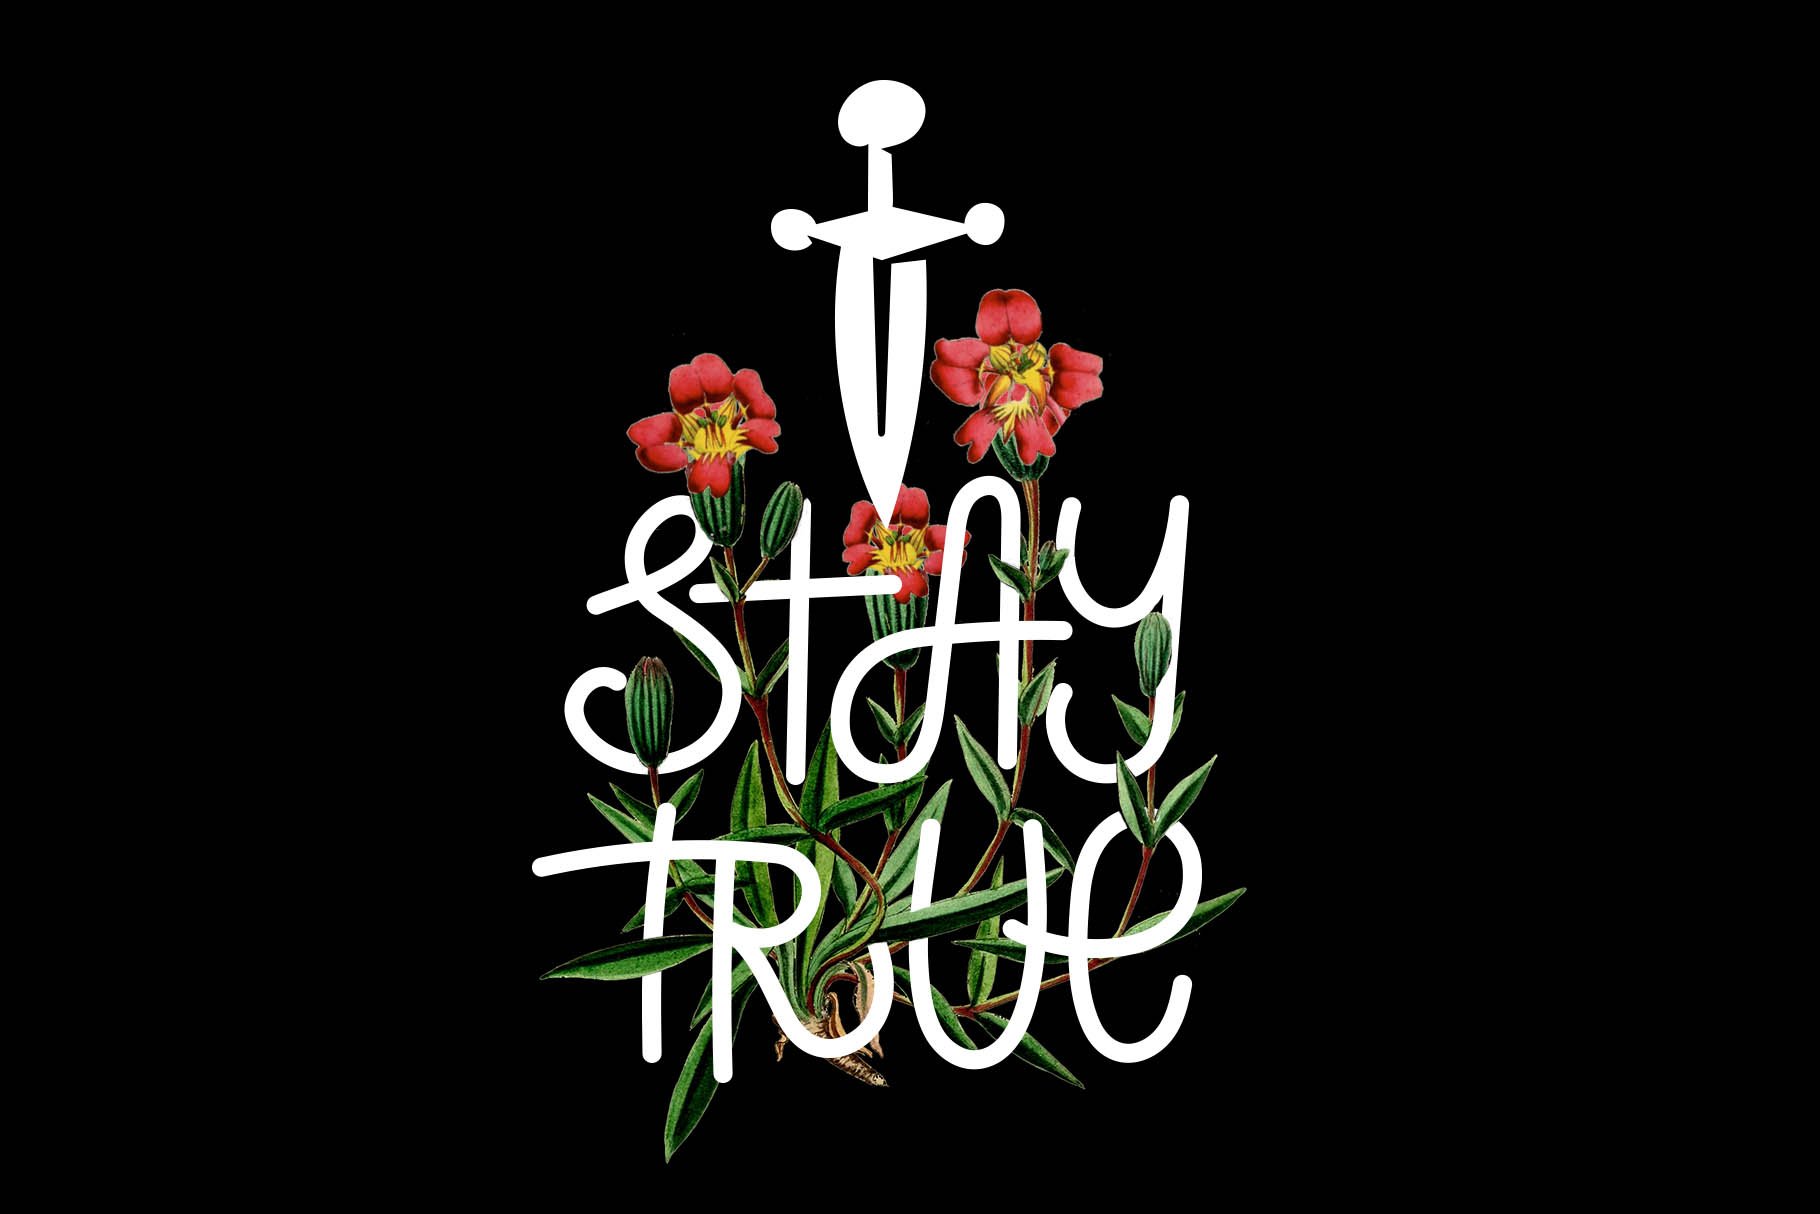 Stay True font cover image.